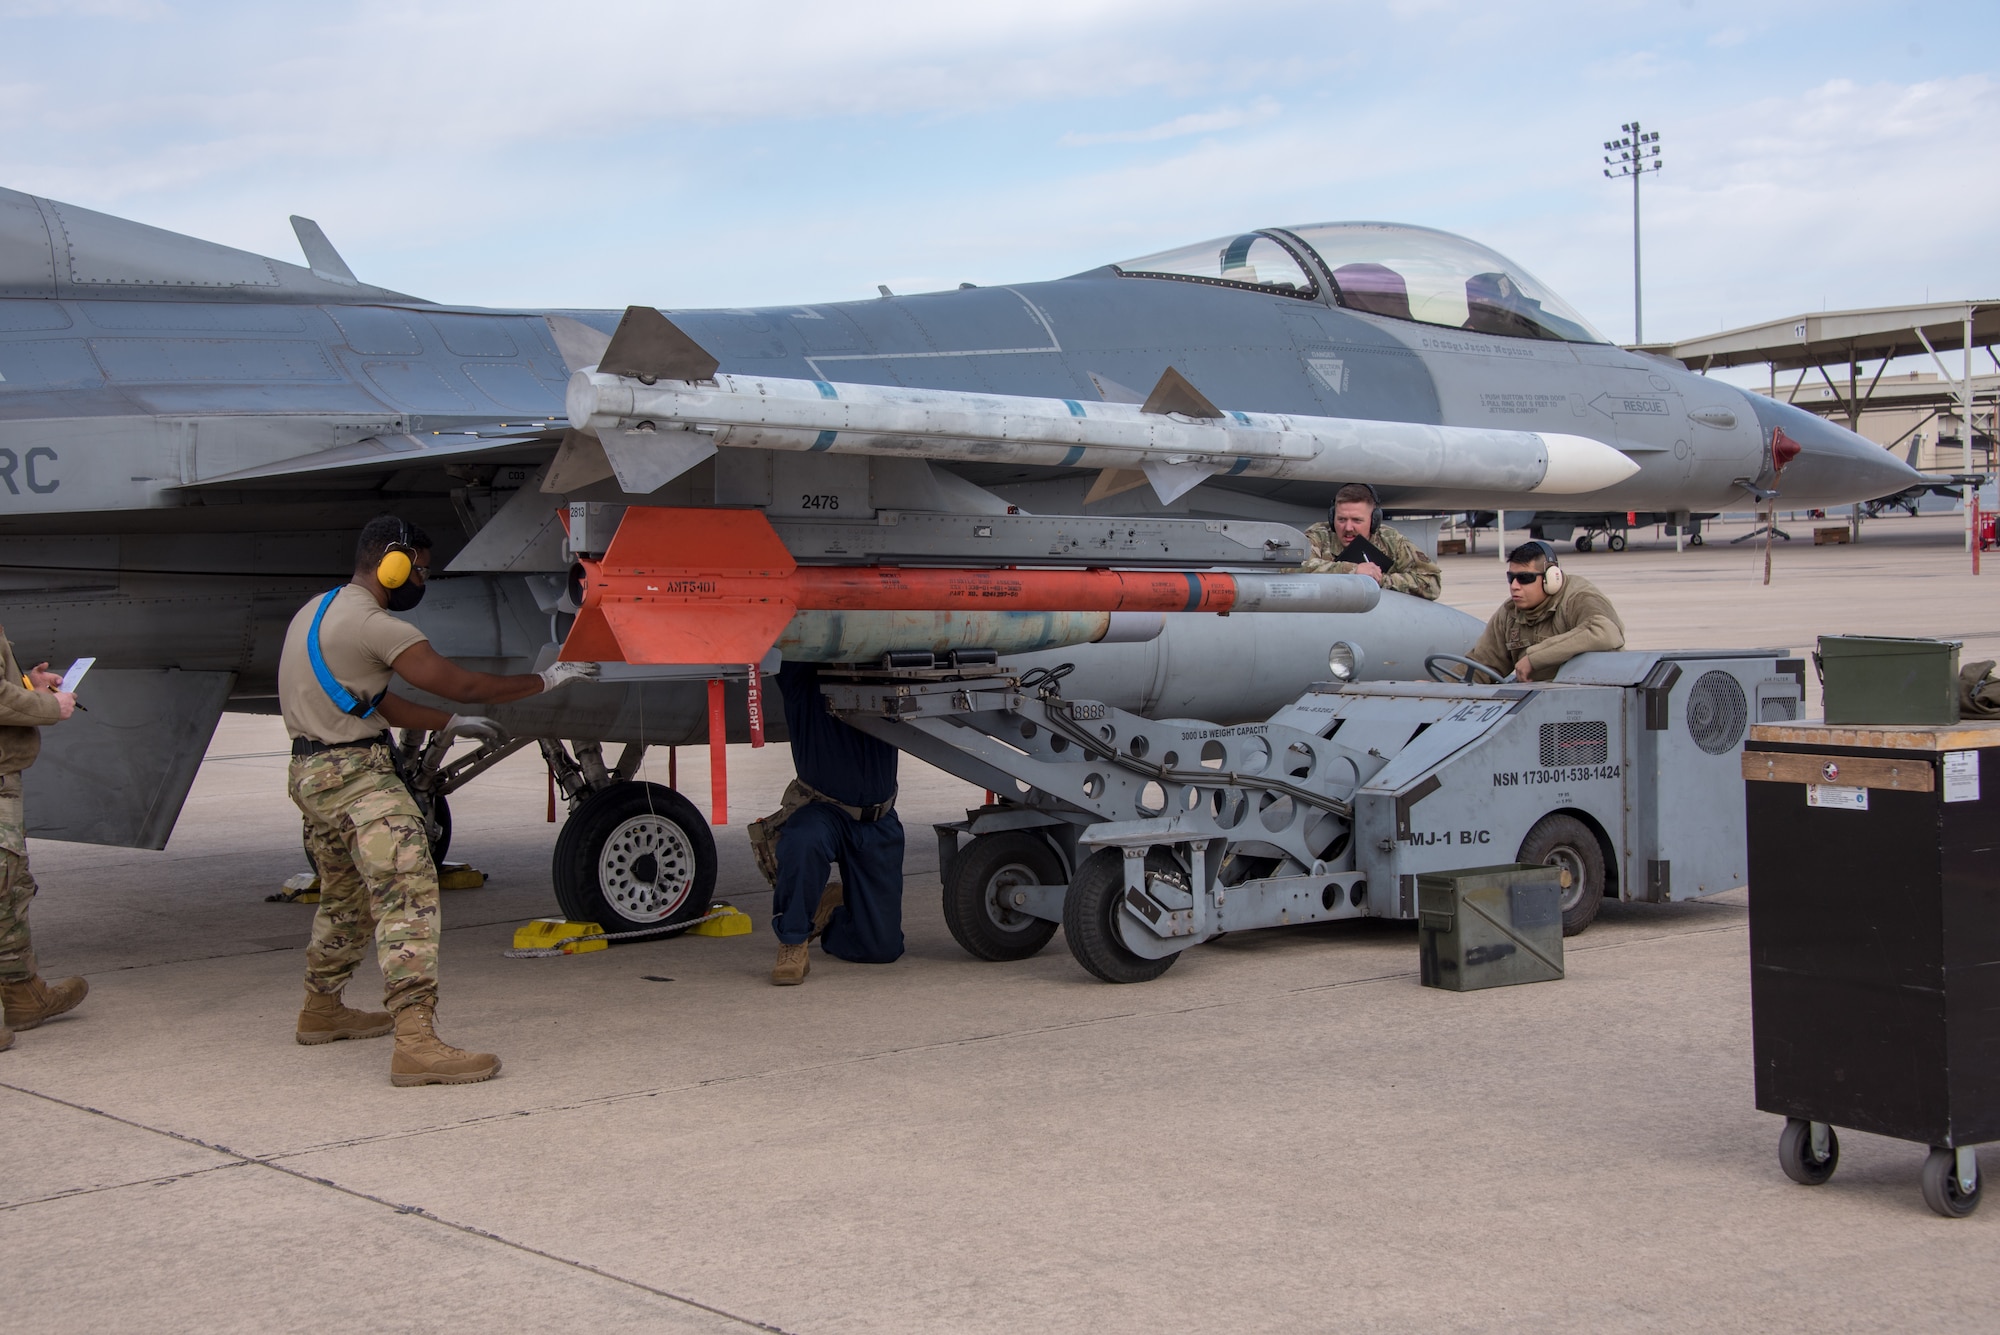 (Left) Tech. Sgt. Shawn Wood, 301st Fighter Wing Aircraft Maintenance Squadron load crew lead, (center) Senior Airman Brandon Knuckles and (right) Senior Airman Emanuel Aguilar load a GBU-12 bomb to the 301st Fighter Wing’s F-16, while being evaluated by (center right) Tech. Sgt. Dakota Daniel during a weapons load competition at U.S. Naval Air Station Joint Reserve Base Fort Worth, Texas on February 5, 2021. The weapons load competition occurs annually, giving the weapons sections a chance to put their four weapons load crews head-to-head loading munitions, testing their knowledge and conducting a uniform inspection to see who the best is. (U.S. Air Force photo by Senior Airman William Downs)